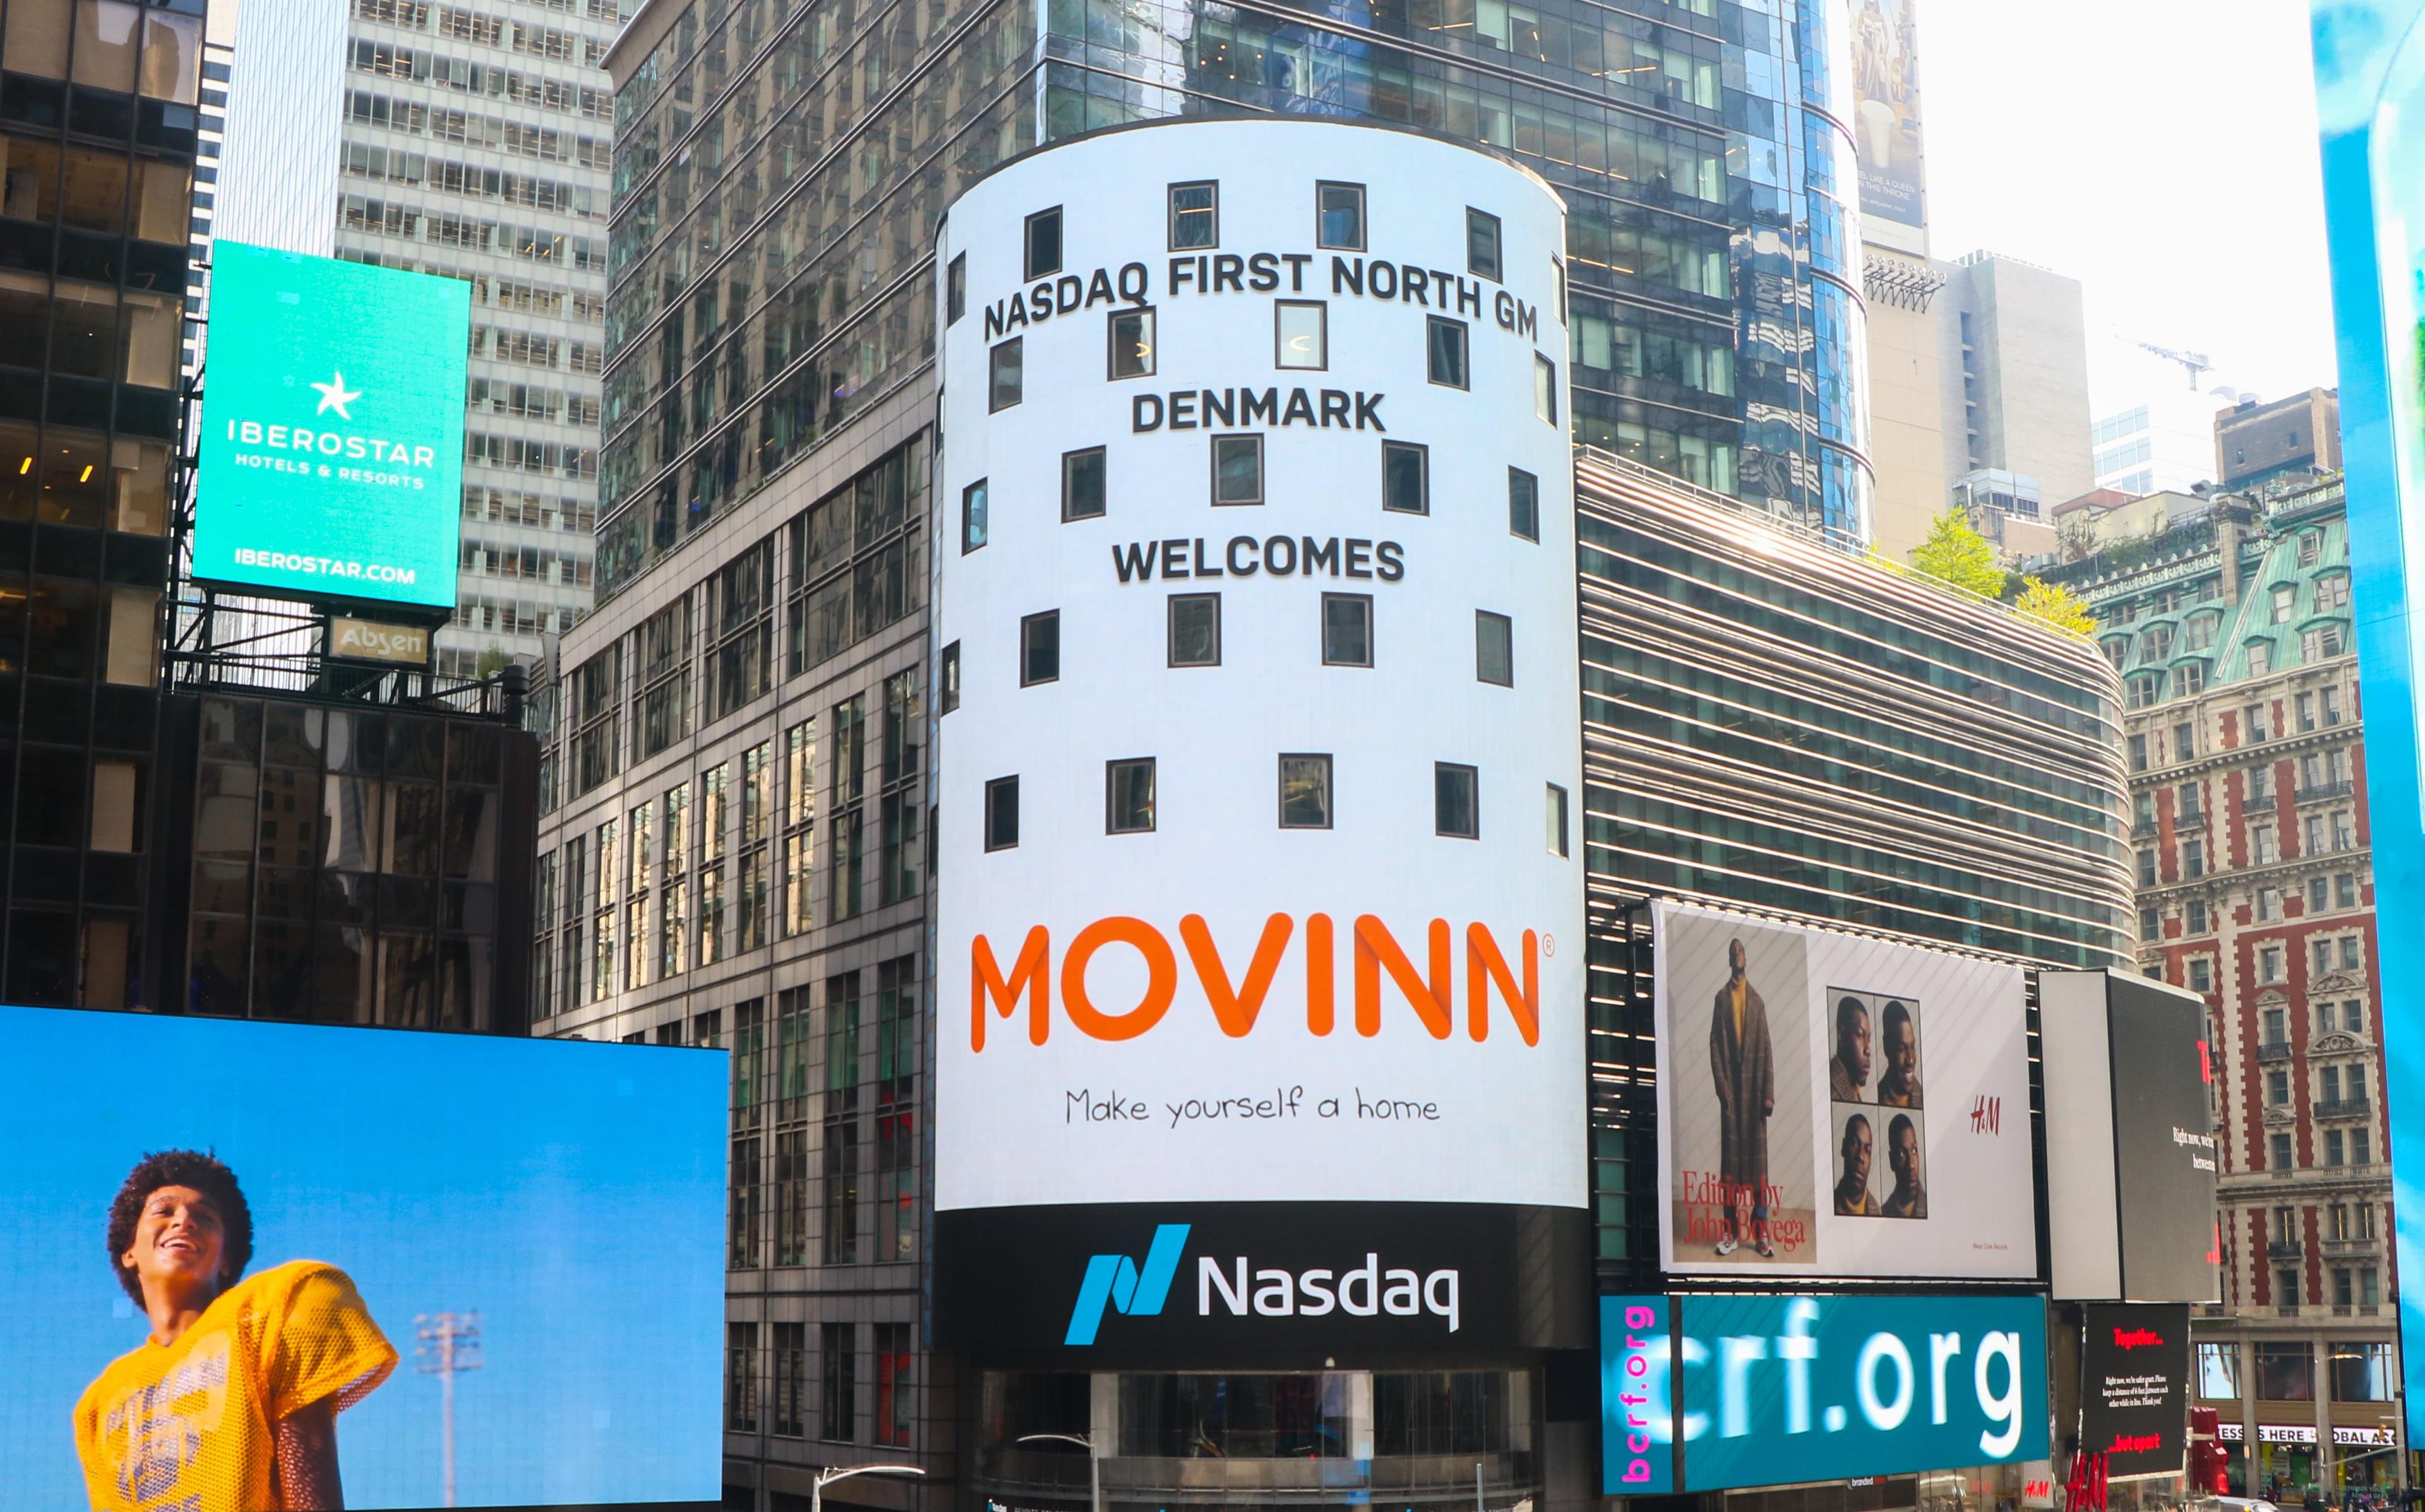 Movinn IPO announcement in Time Square, New York